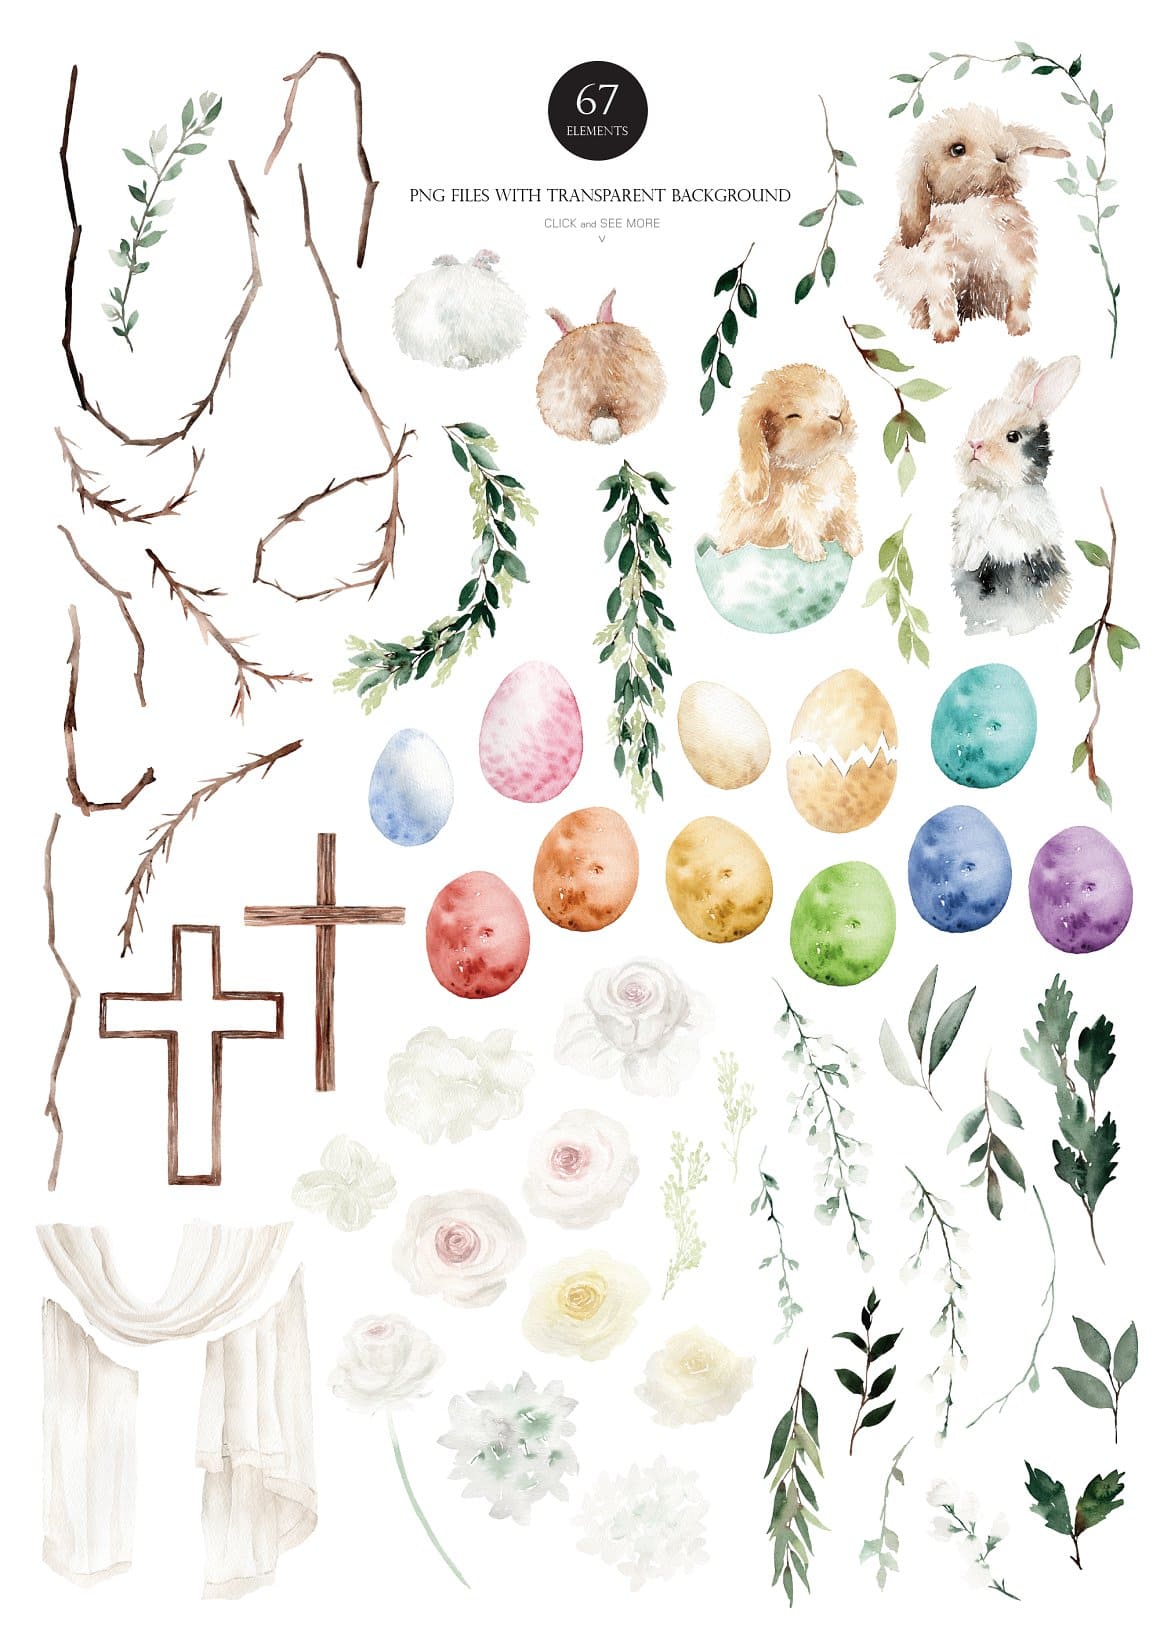 Clipart Easter inscription: "67 Elements, PNG files with Transparent Background".